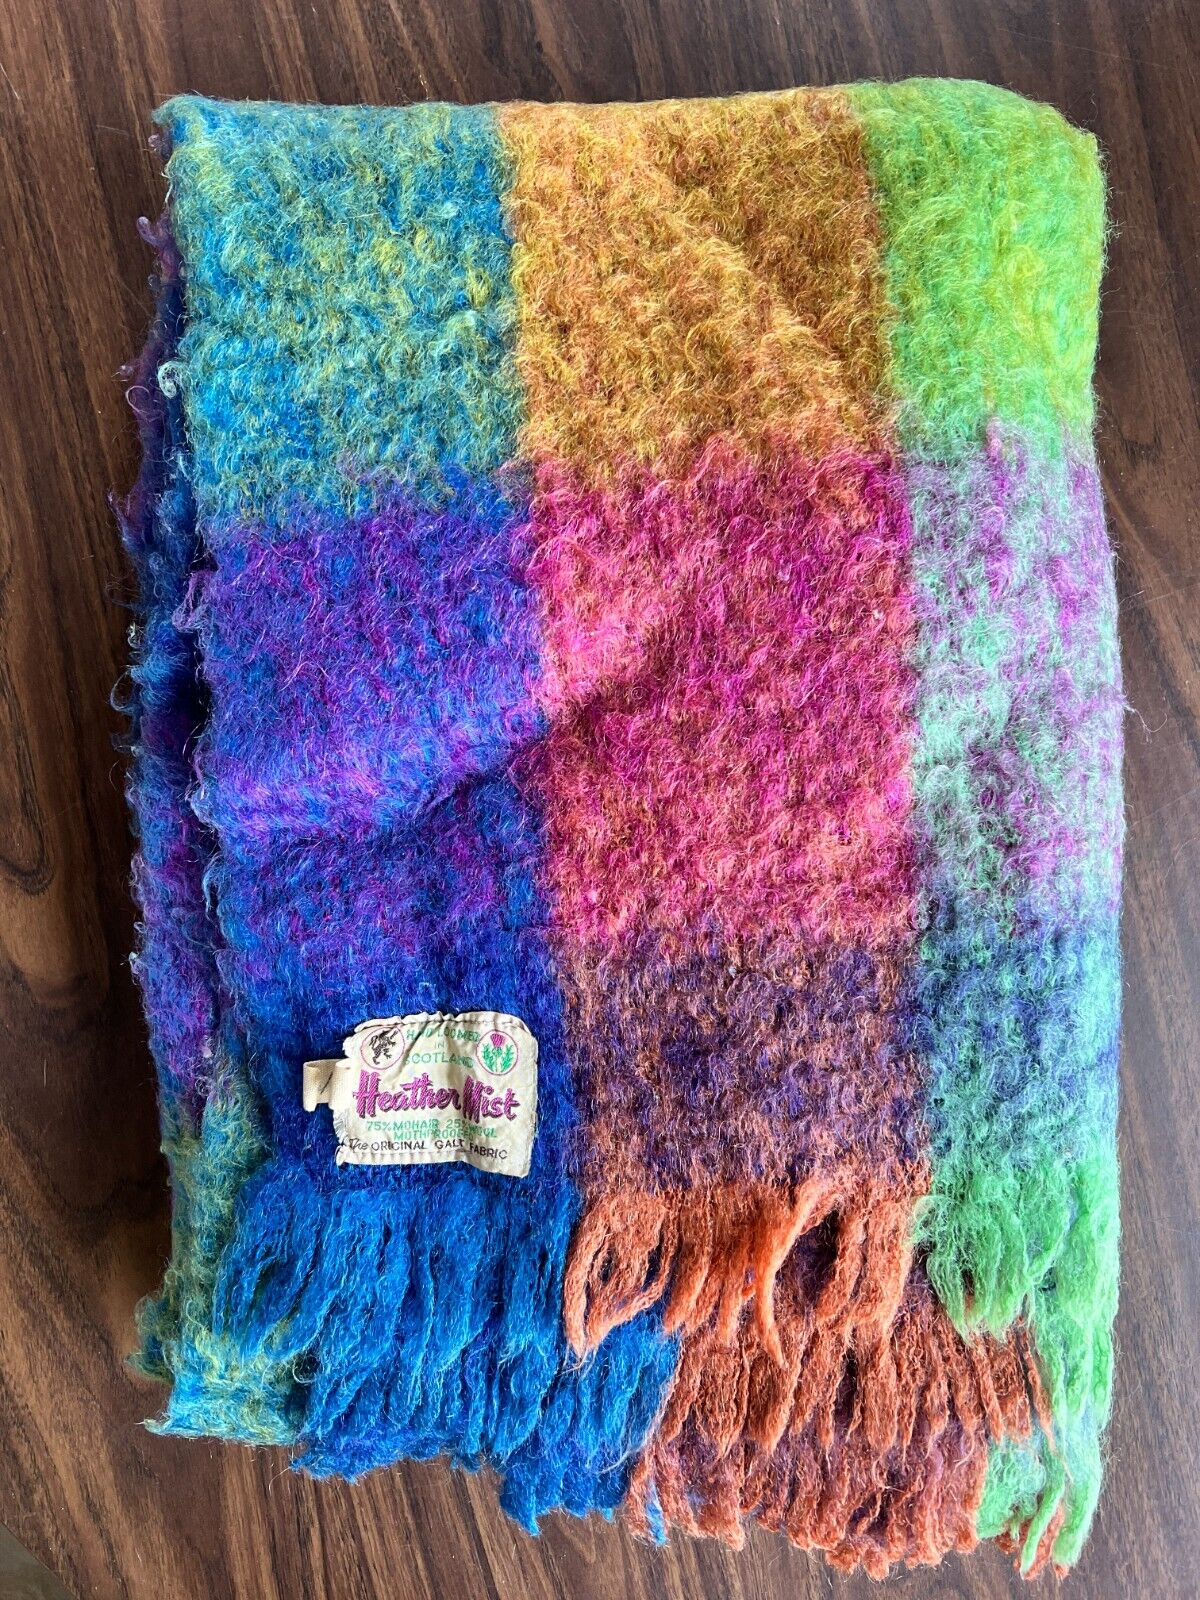 Vintage Heather Mist Mohair Blanket 72x48 Hand Loomed Scotland GREAT COLORS